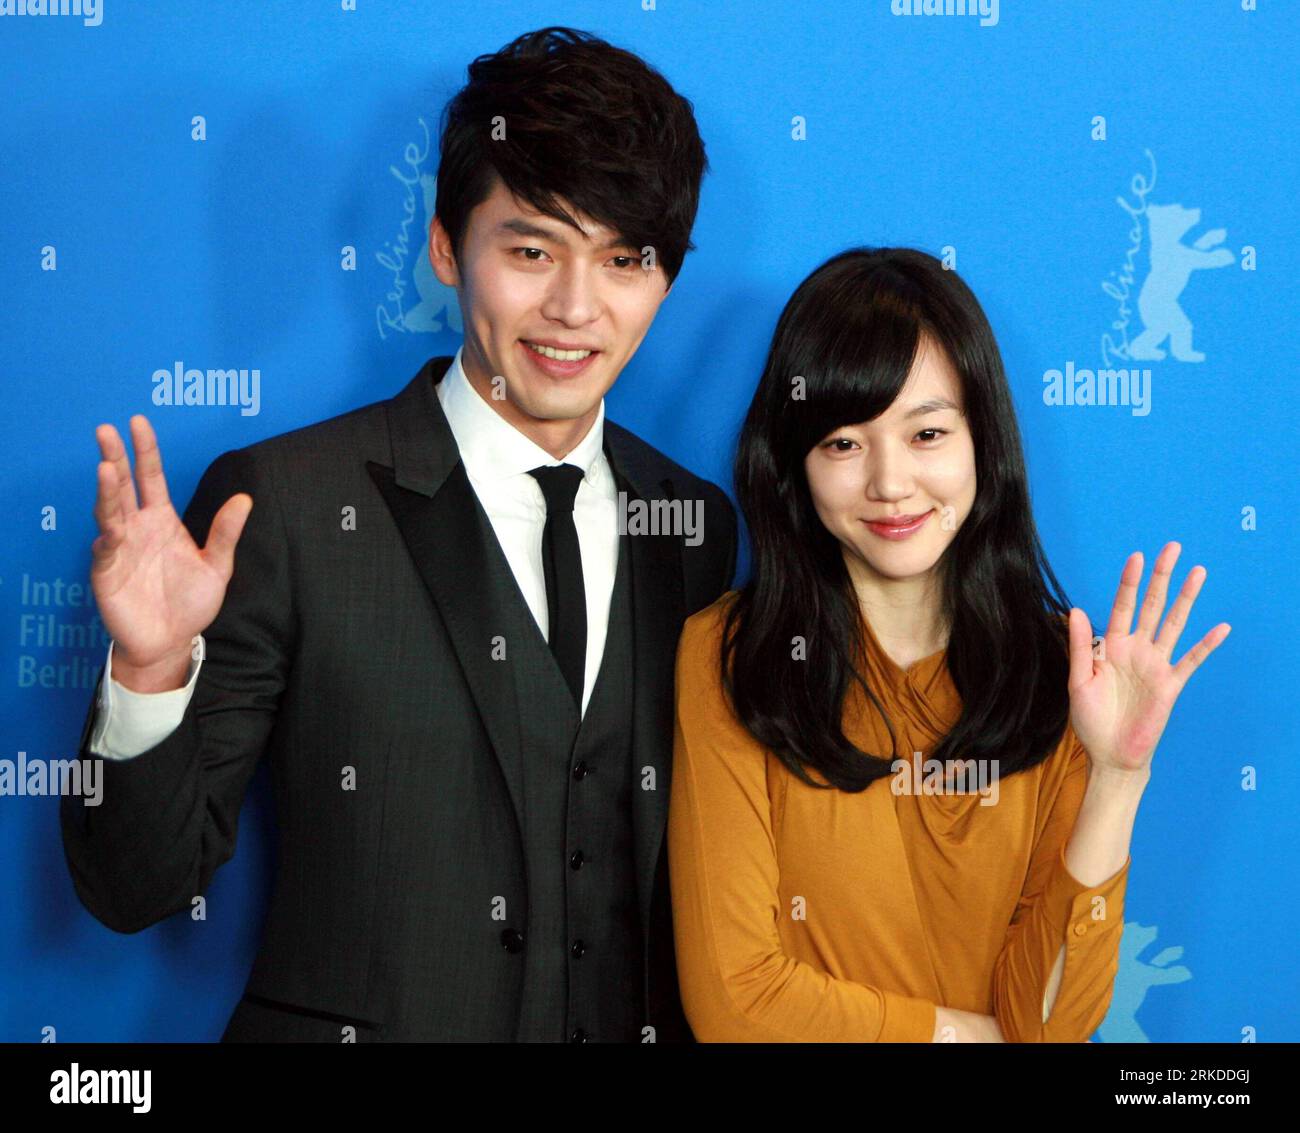 Bildnummer: 54921437  Datum: 17.02.2011  Copyright: imago/Xinhua (110217) -- BERLIN, Feb. 17, 2011 (Xinhua) -- South Korean actor Hyun Bin (L) and actress Lim Soo-jung arrive for a press conference for the film Come Rain, Come Shine by South Korean director Yoon-ki Lee during the Berlin Film Festival, on Feb. 17, 2011. The 61st Berlin Film Festival will be held from Feb. 10 to Feb. 20 with the screening of about 400 films from 58 countries. (Xinhua/Luo Huanhuan) (zcc) GERMANY-BERLIN-FILM FESTIVAL PUBLICATIONxNOTxINxCHN Kultur Entertainment People Film 61. Internationale Filmfestspiele Berlinal Stock Photo